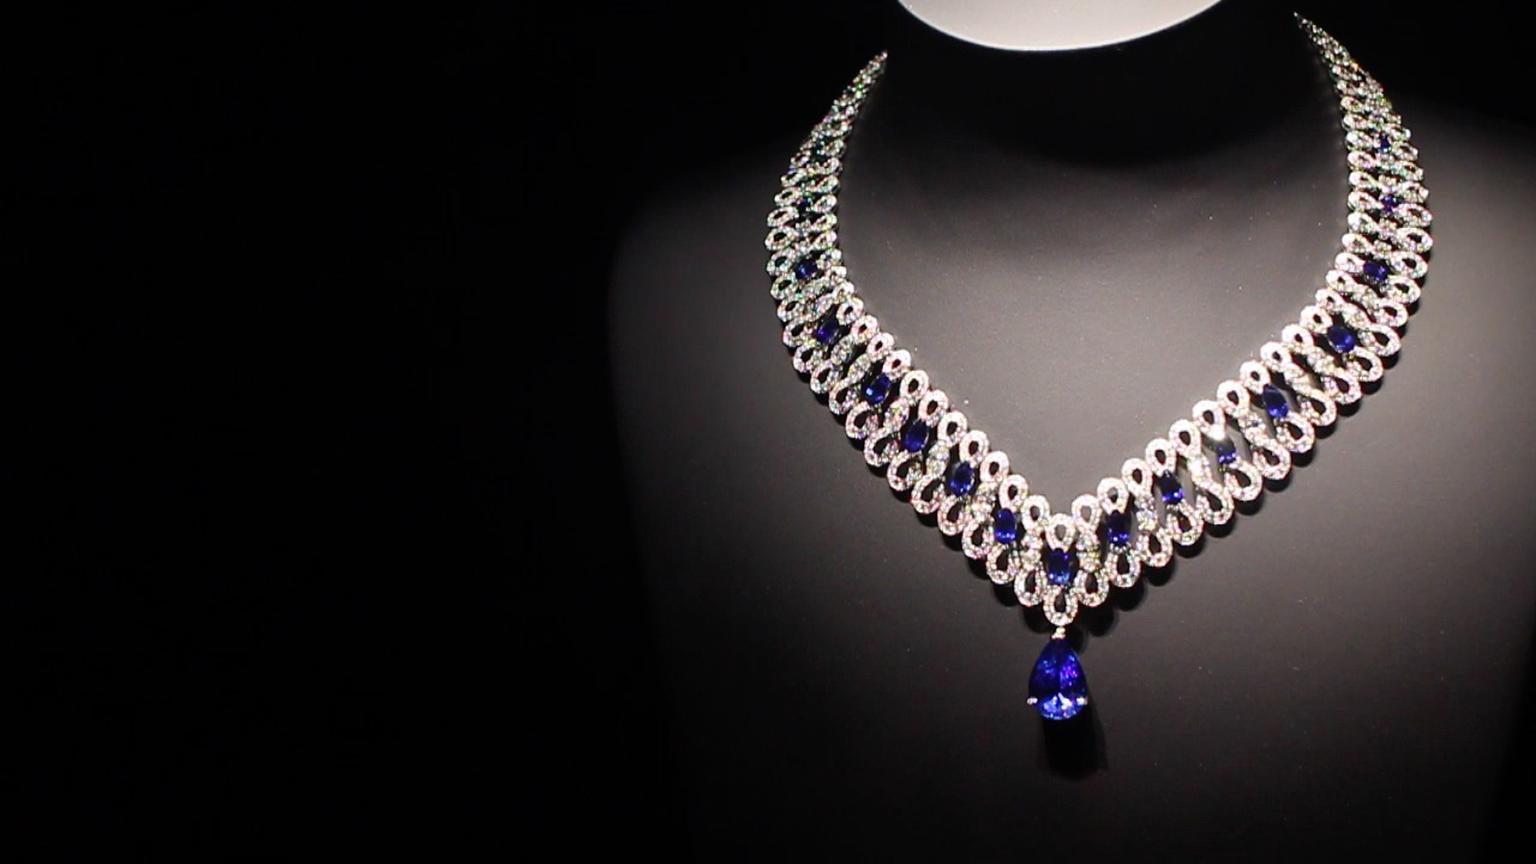 Extremely Piaget collection Infinity necklace with diamonds intertwining like ribbon underneath pear-shaped sapphires and diamonds leading to a dangling sapphire pear-shaped drop.